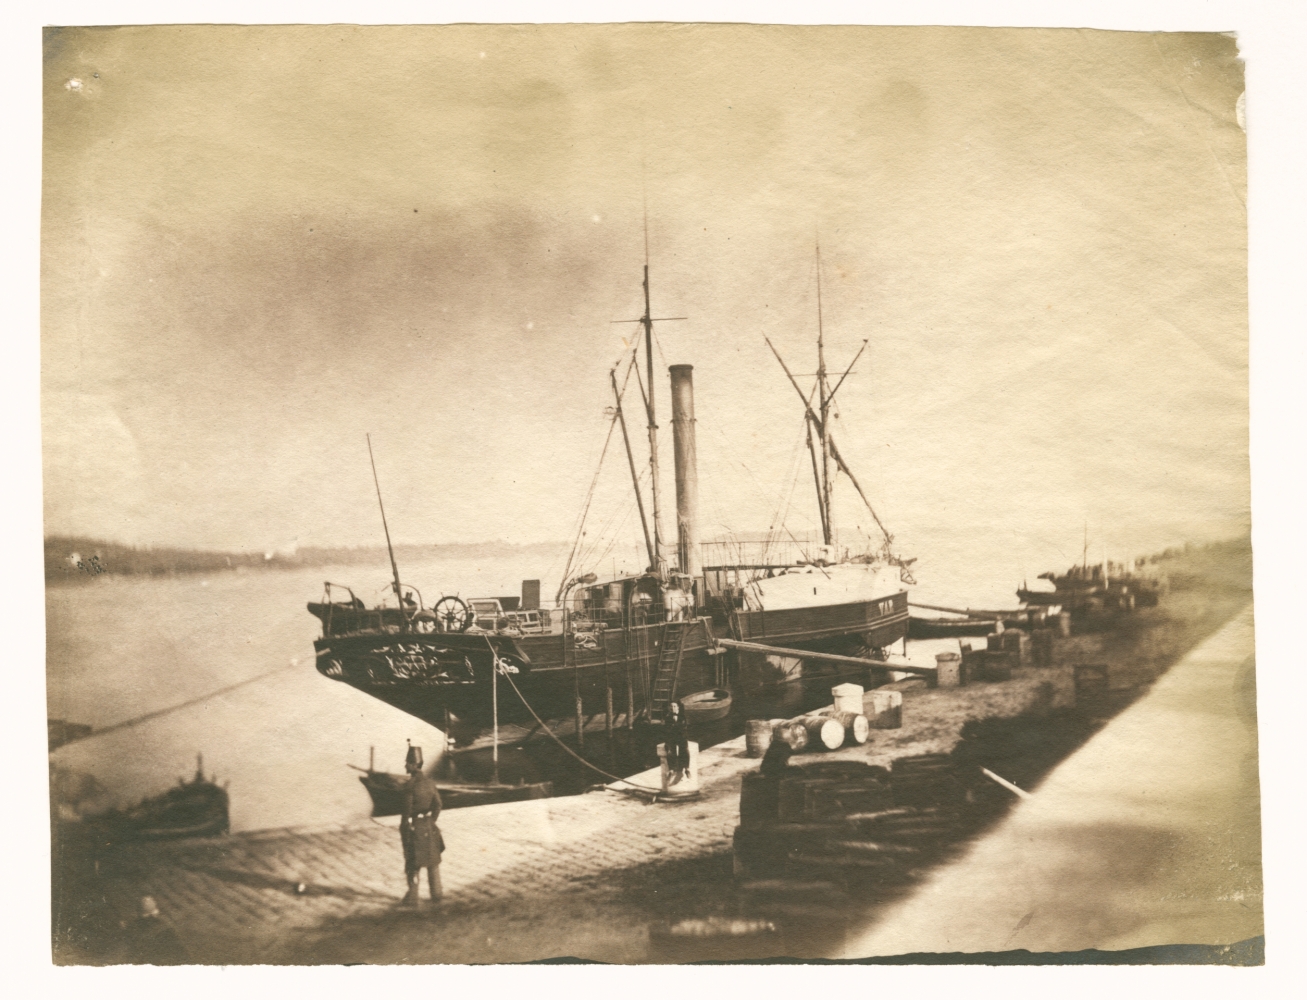 Charles NÈGRE (French, 1820-1880) The port at Toulon, circa 1853 Salt print from a collodion on glass negative 15.3 x 19.7 cm Inscribed "E-33 / No 91" by André Jammes in pencil on verso